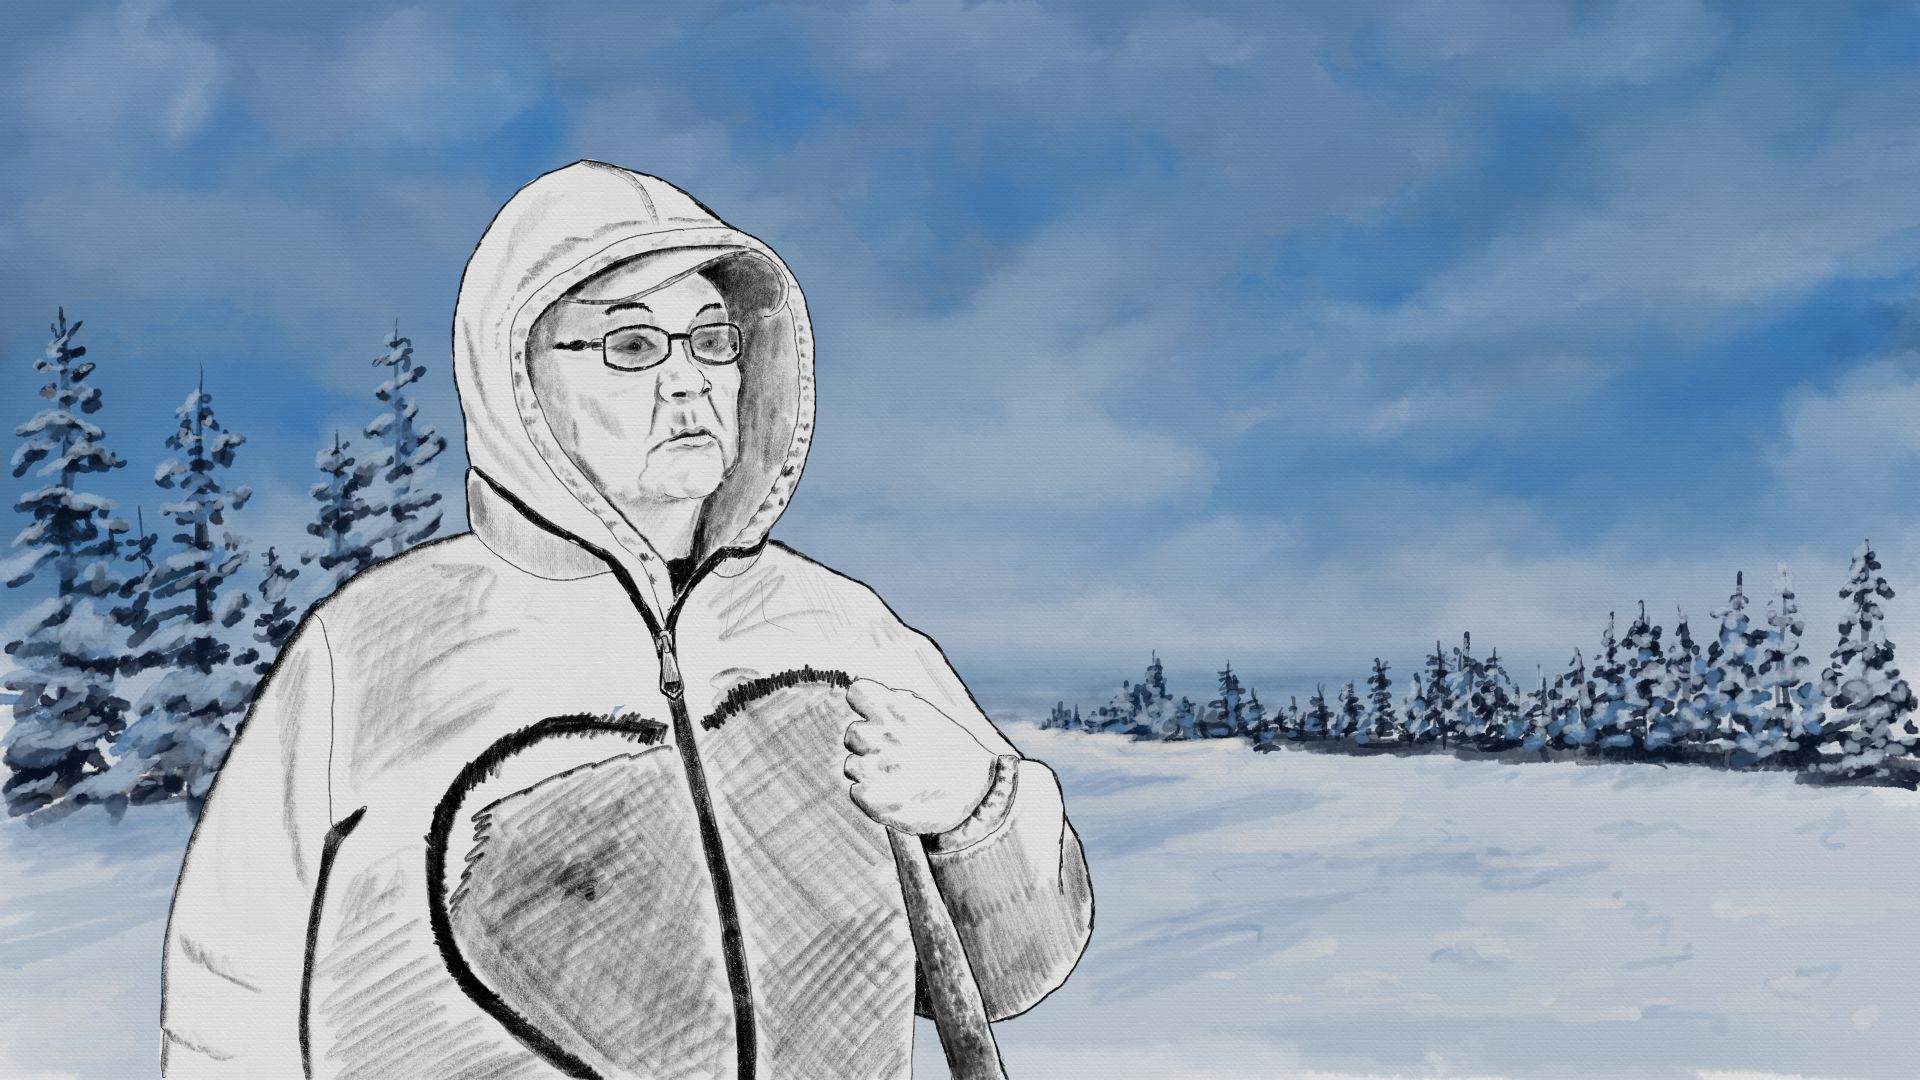 An illustration shows Wet'suwet'en elder and matriarch Auntie Janet. Snow covers the ground and the fir trees behind her.